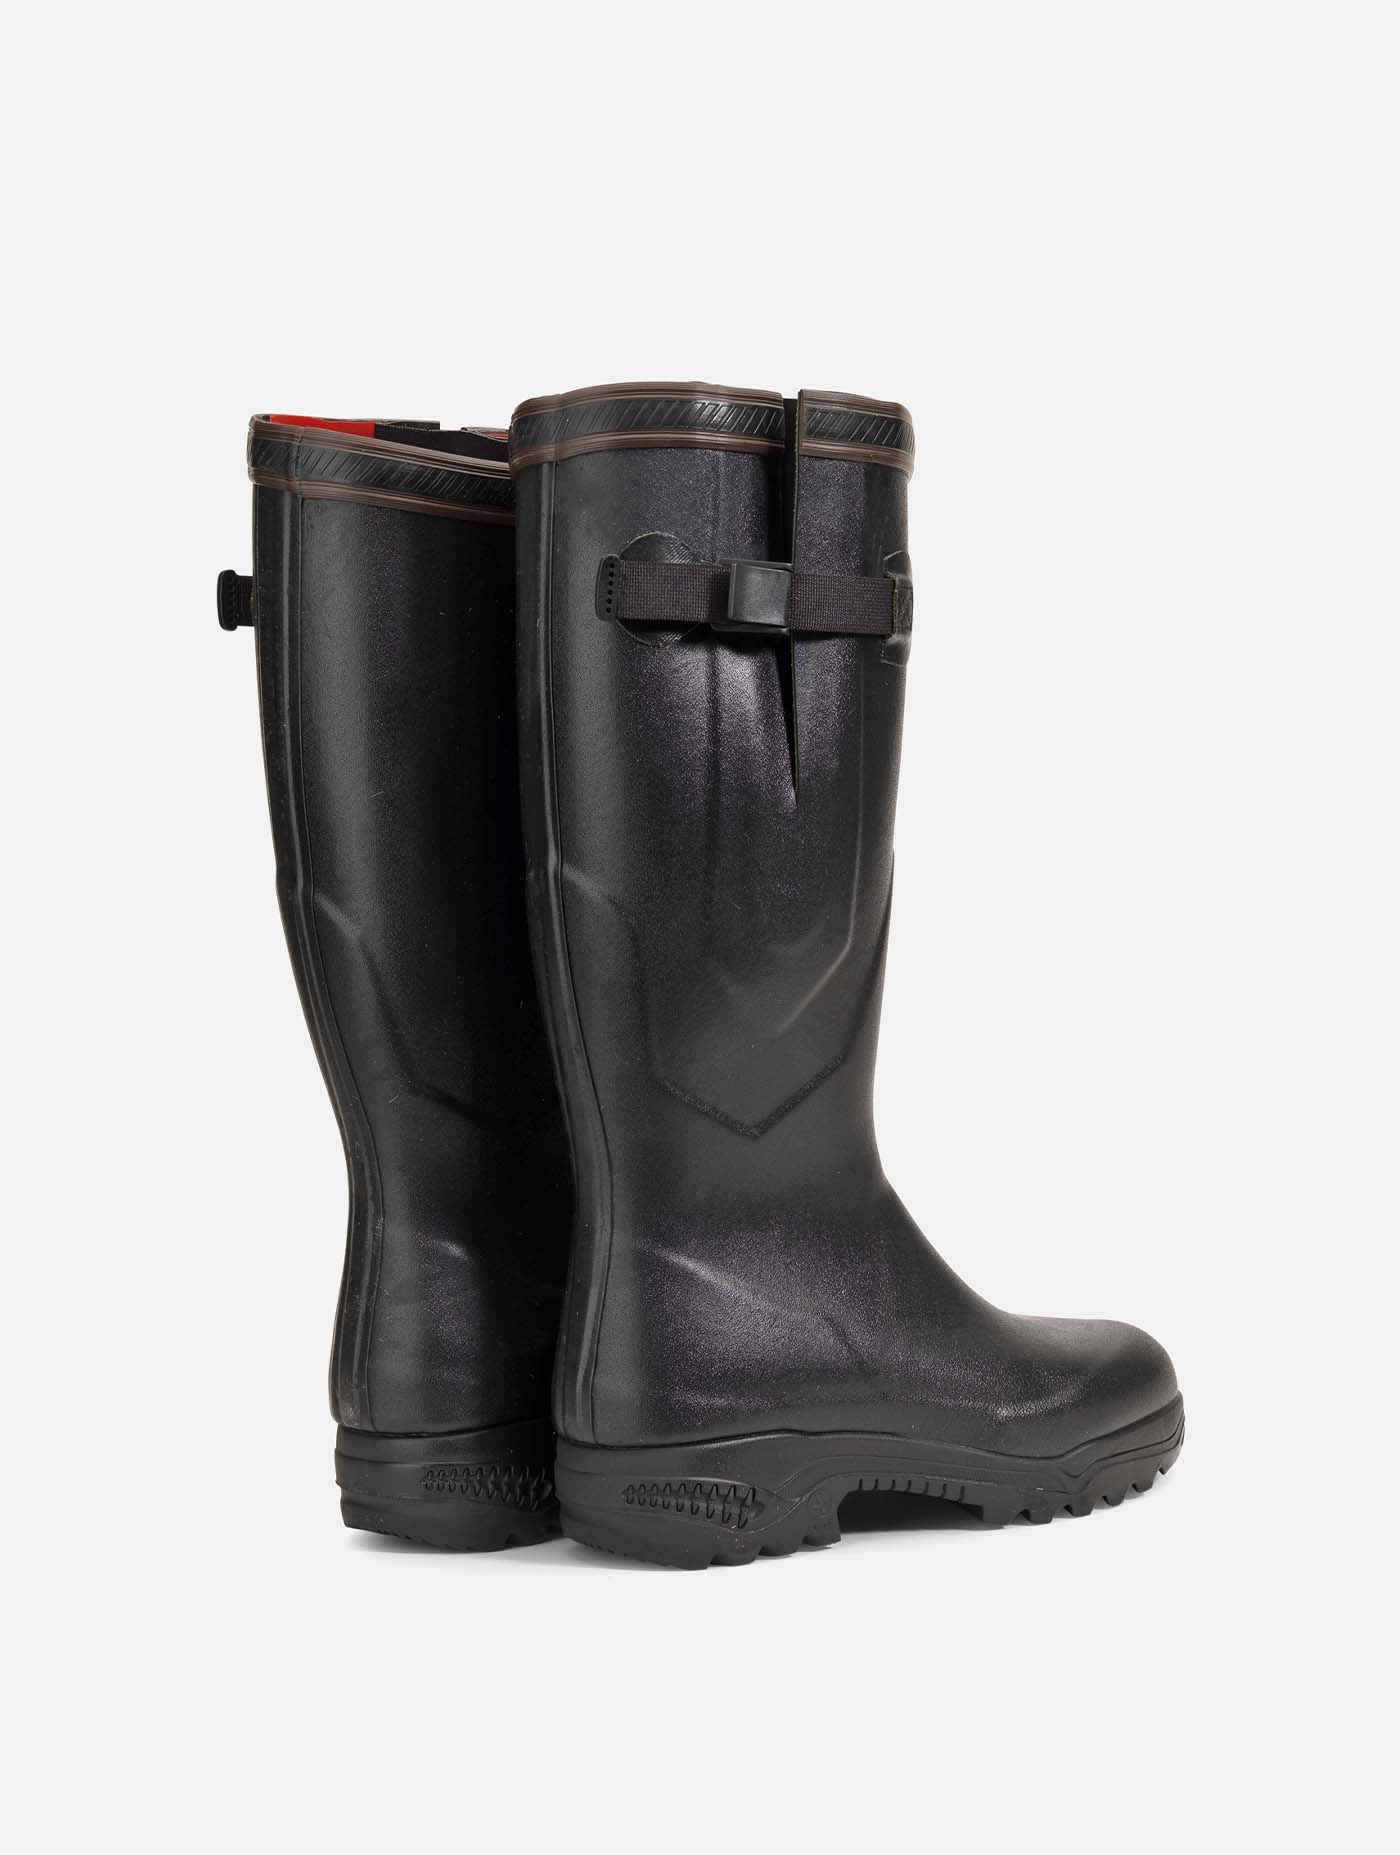 Aigle - Anti-fatigue boots for weather, Made in France Noir - Parcours® 2 | AIGLE